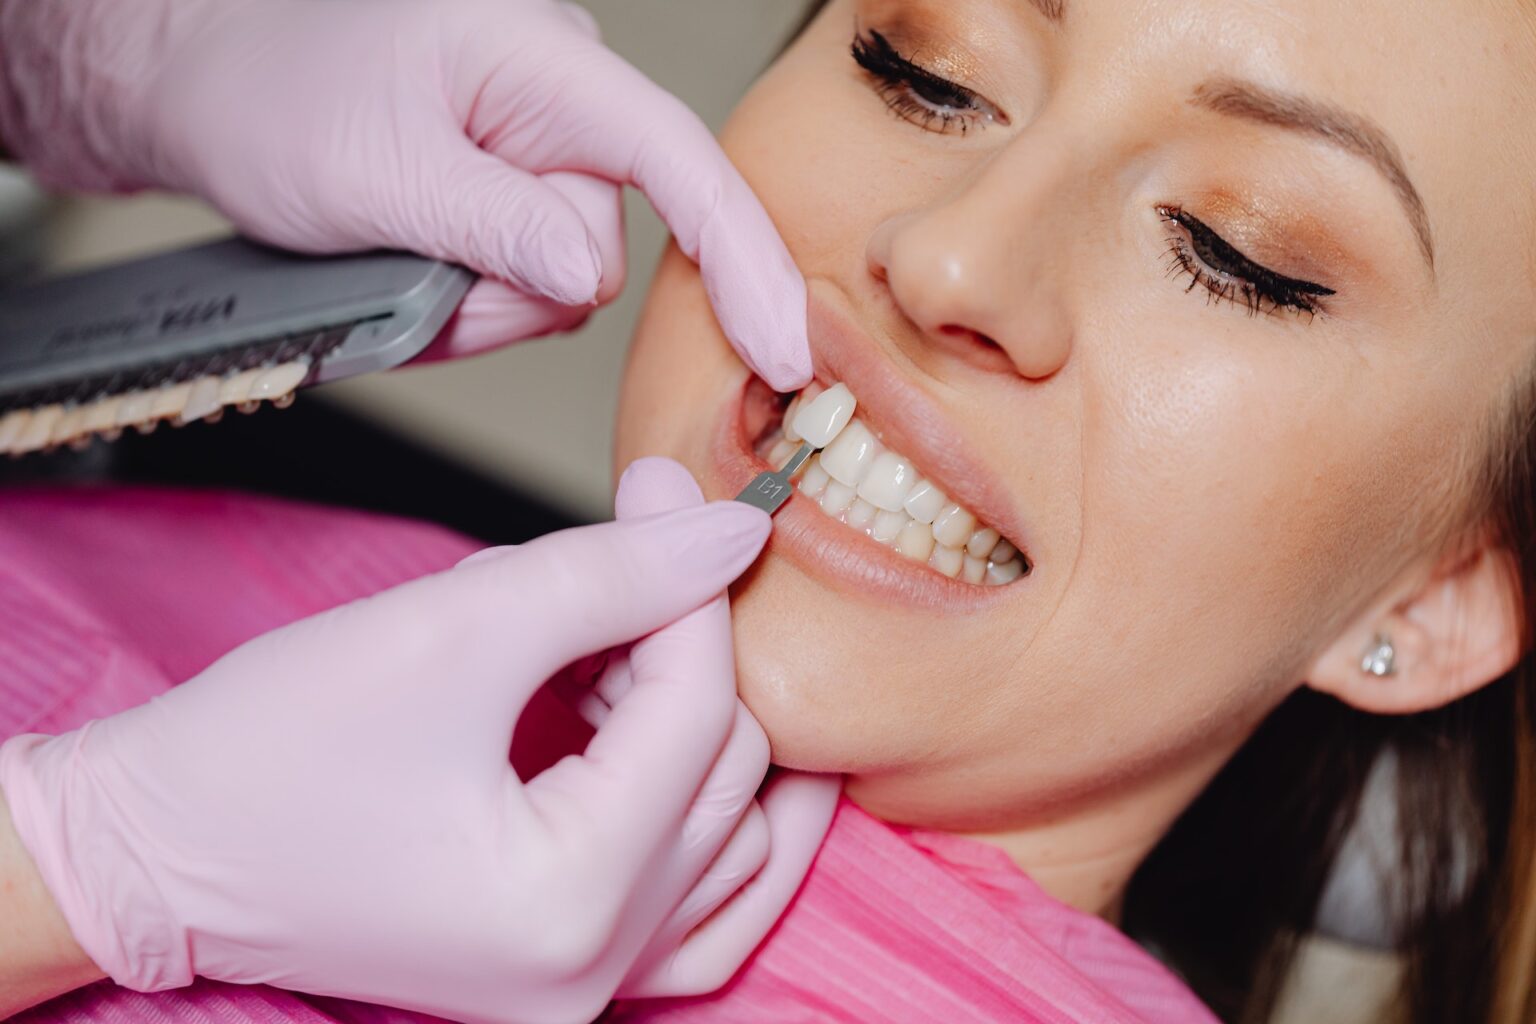 A dentist matching a dental veneer to a patient’s tooth